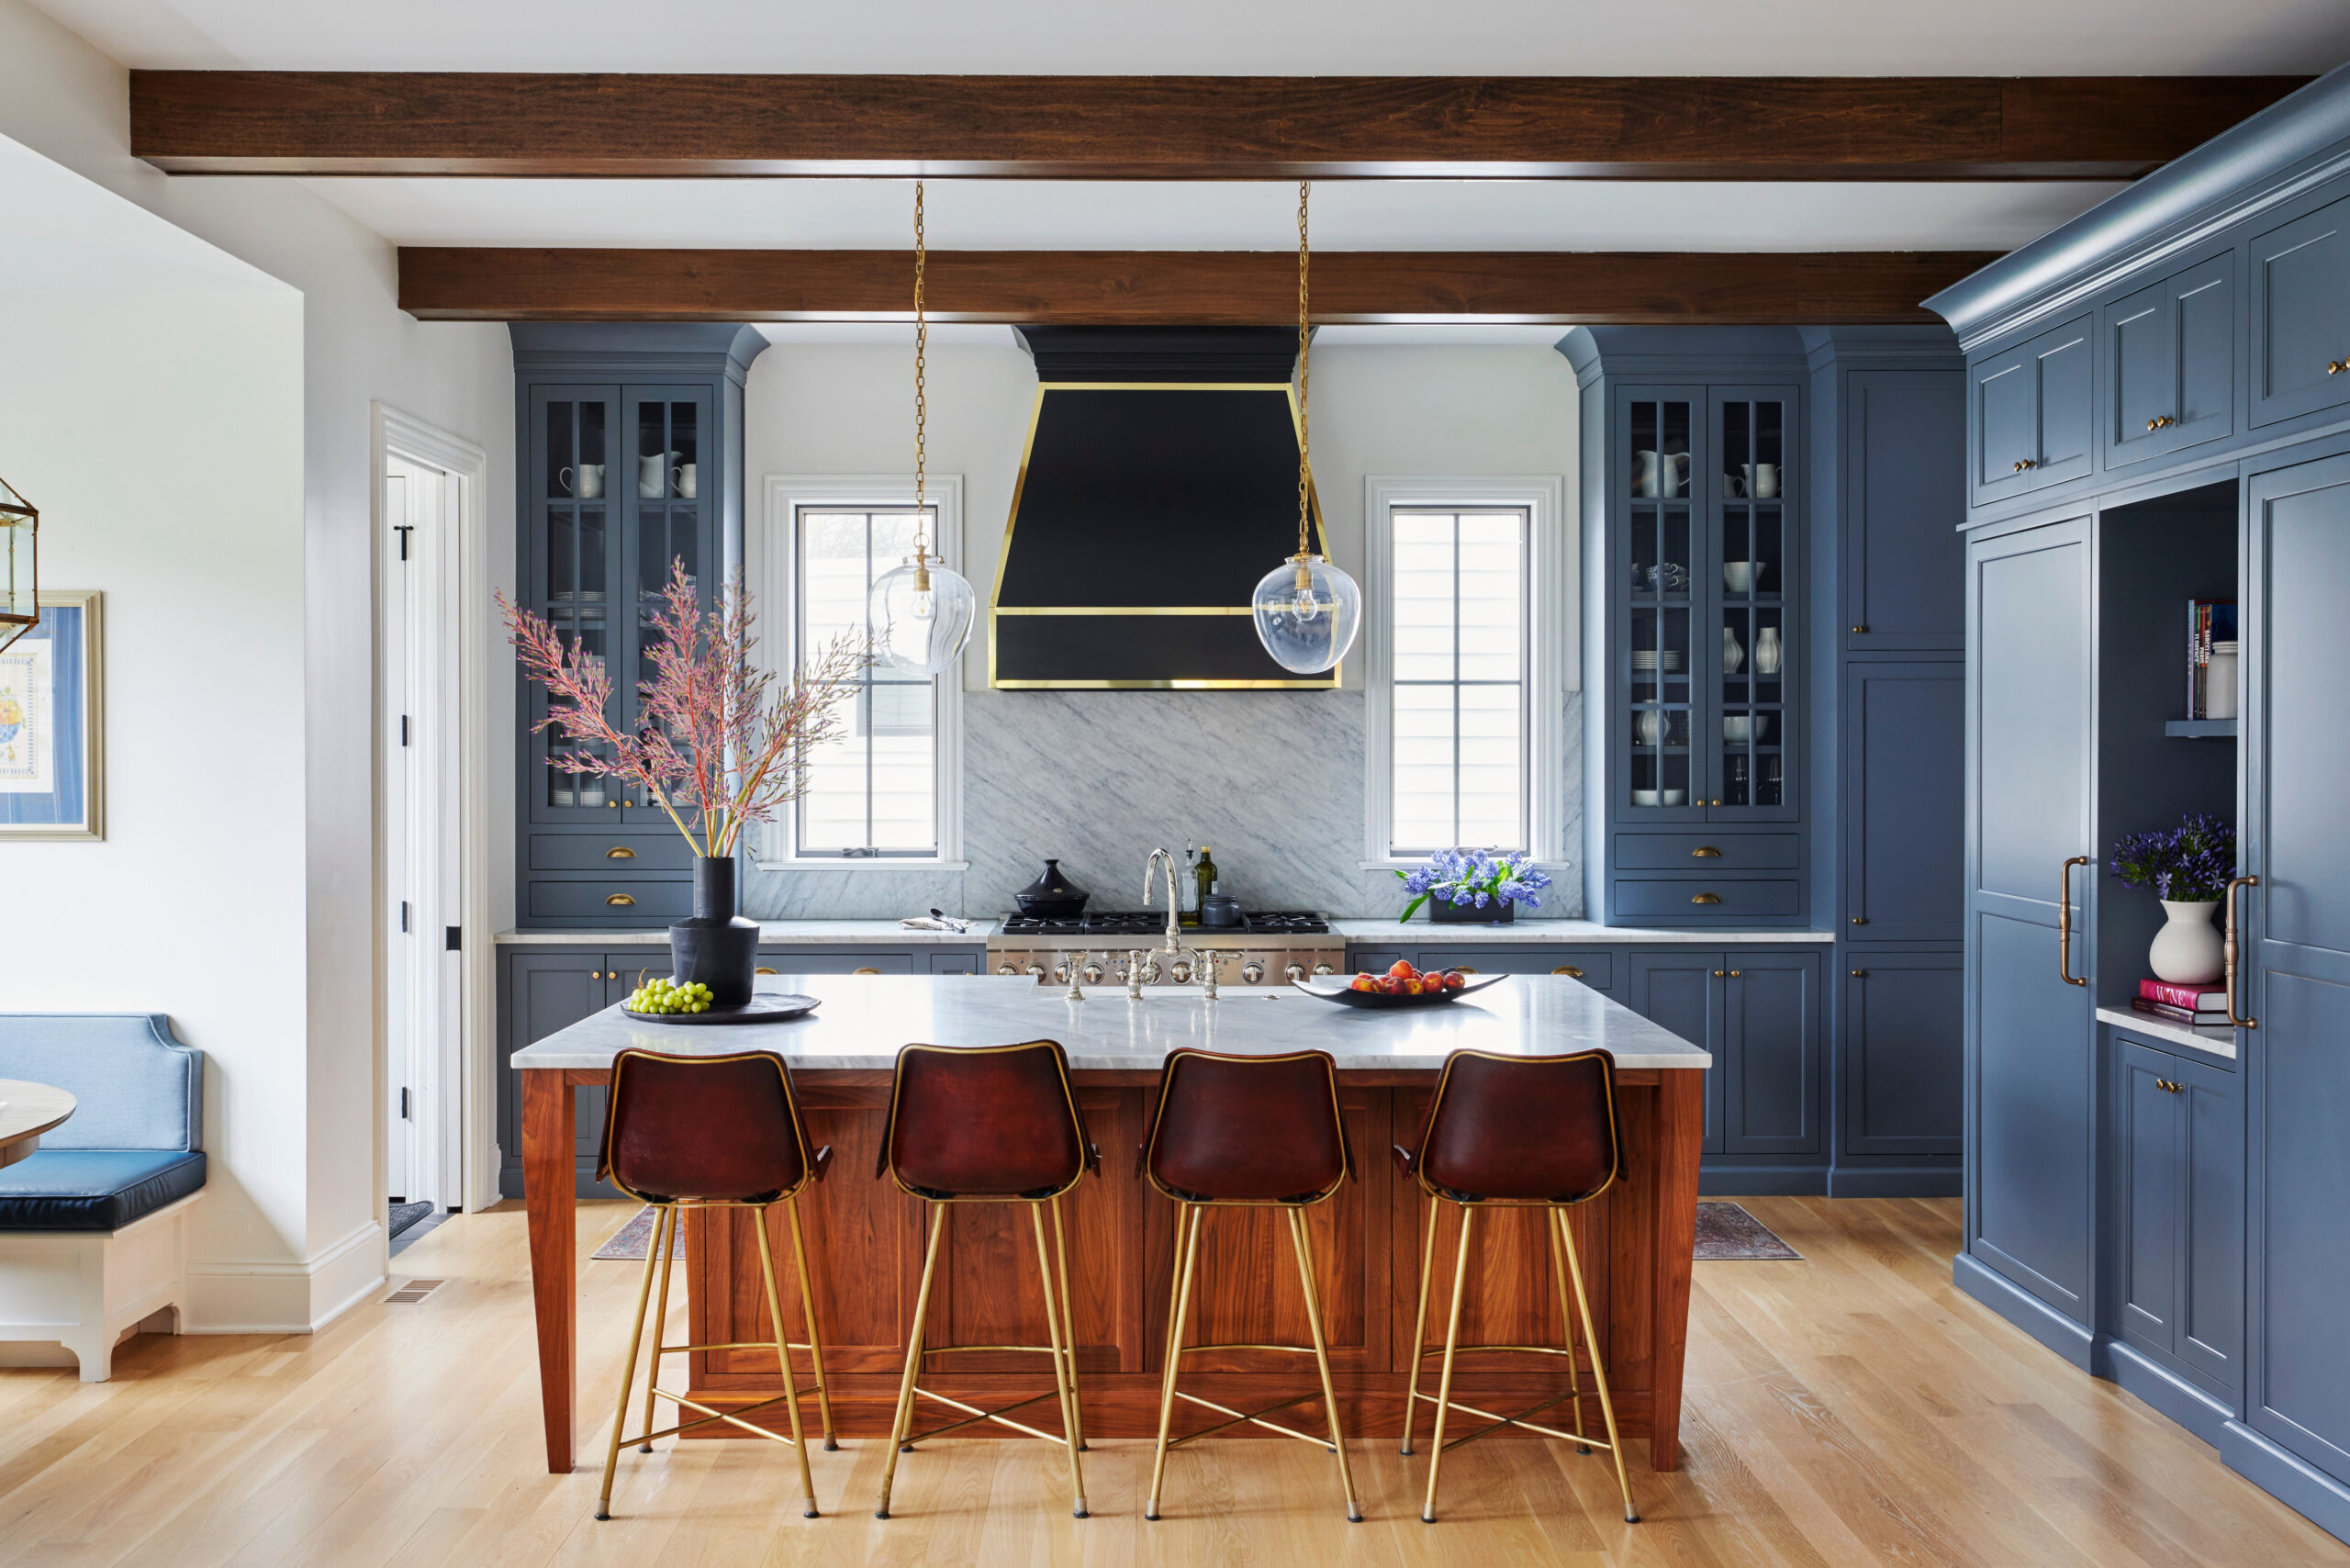 Kitchen Styles to Consider for Your Remodel